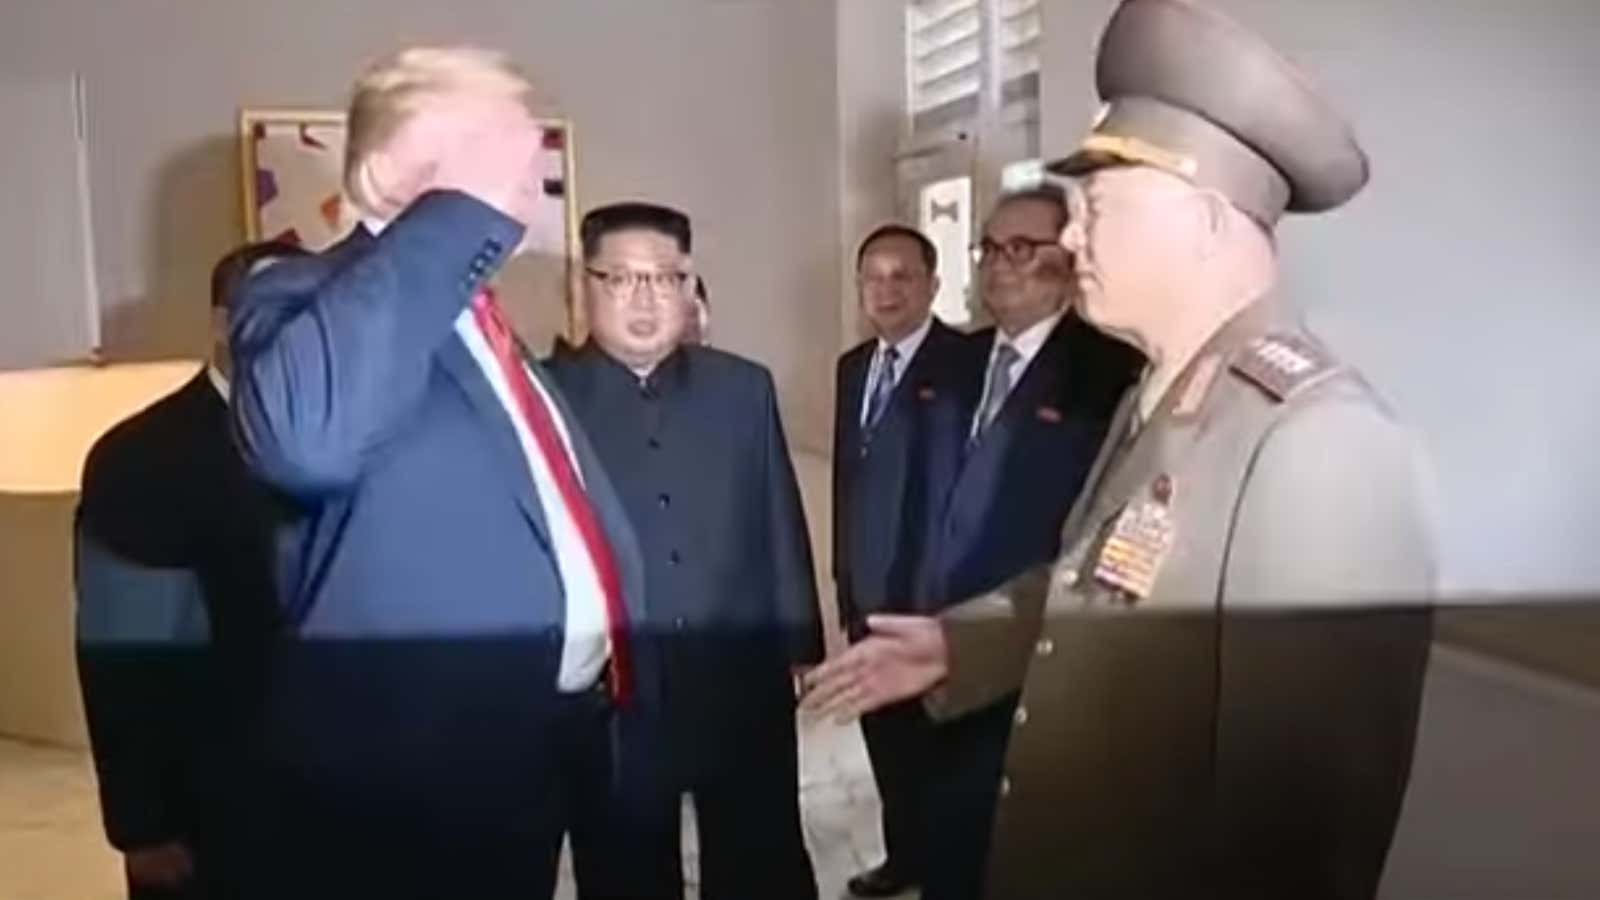 A handshake turning into a salute.